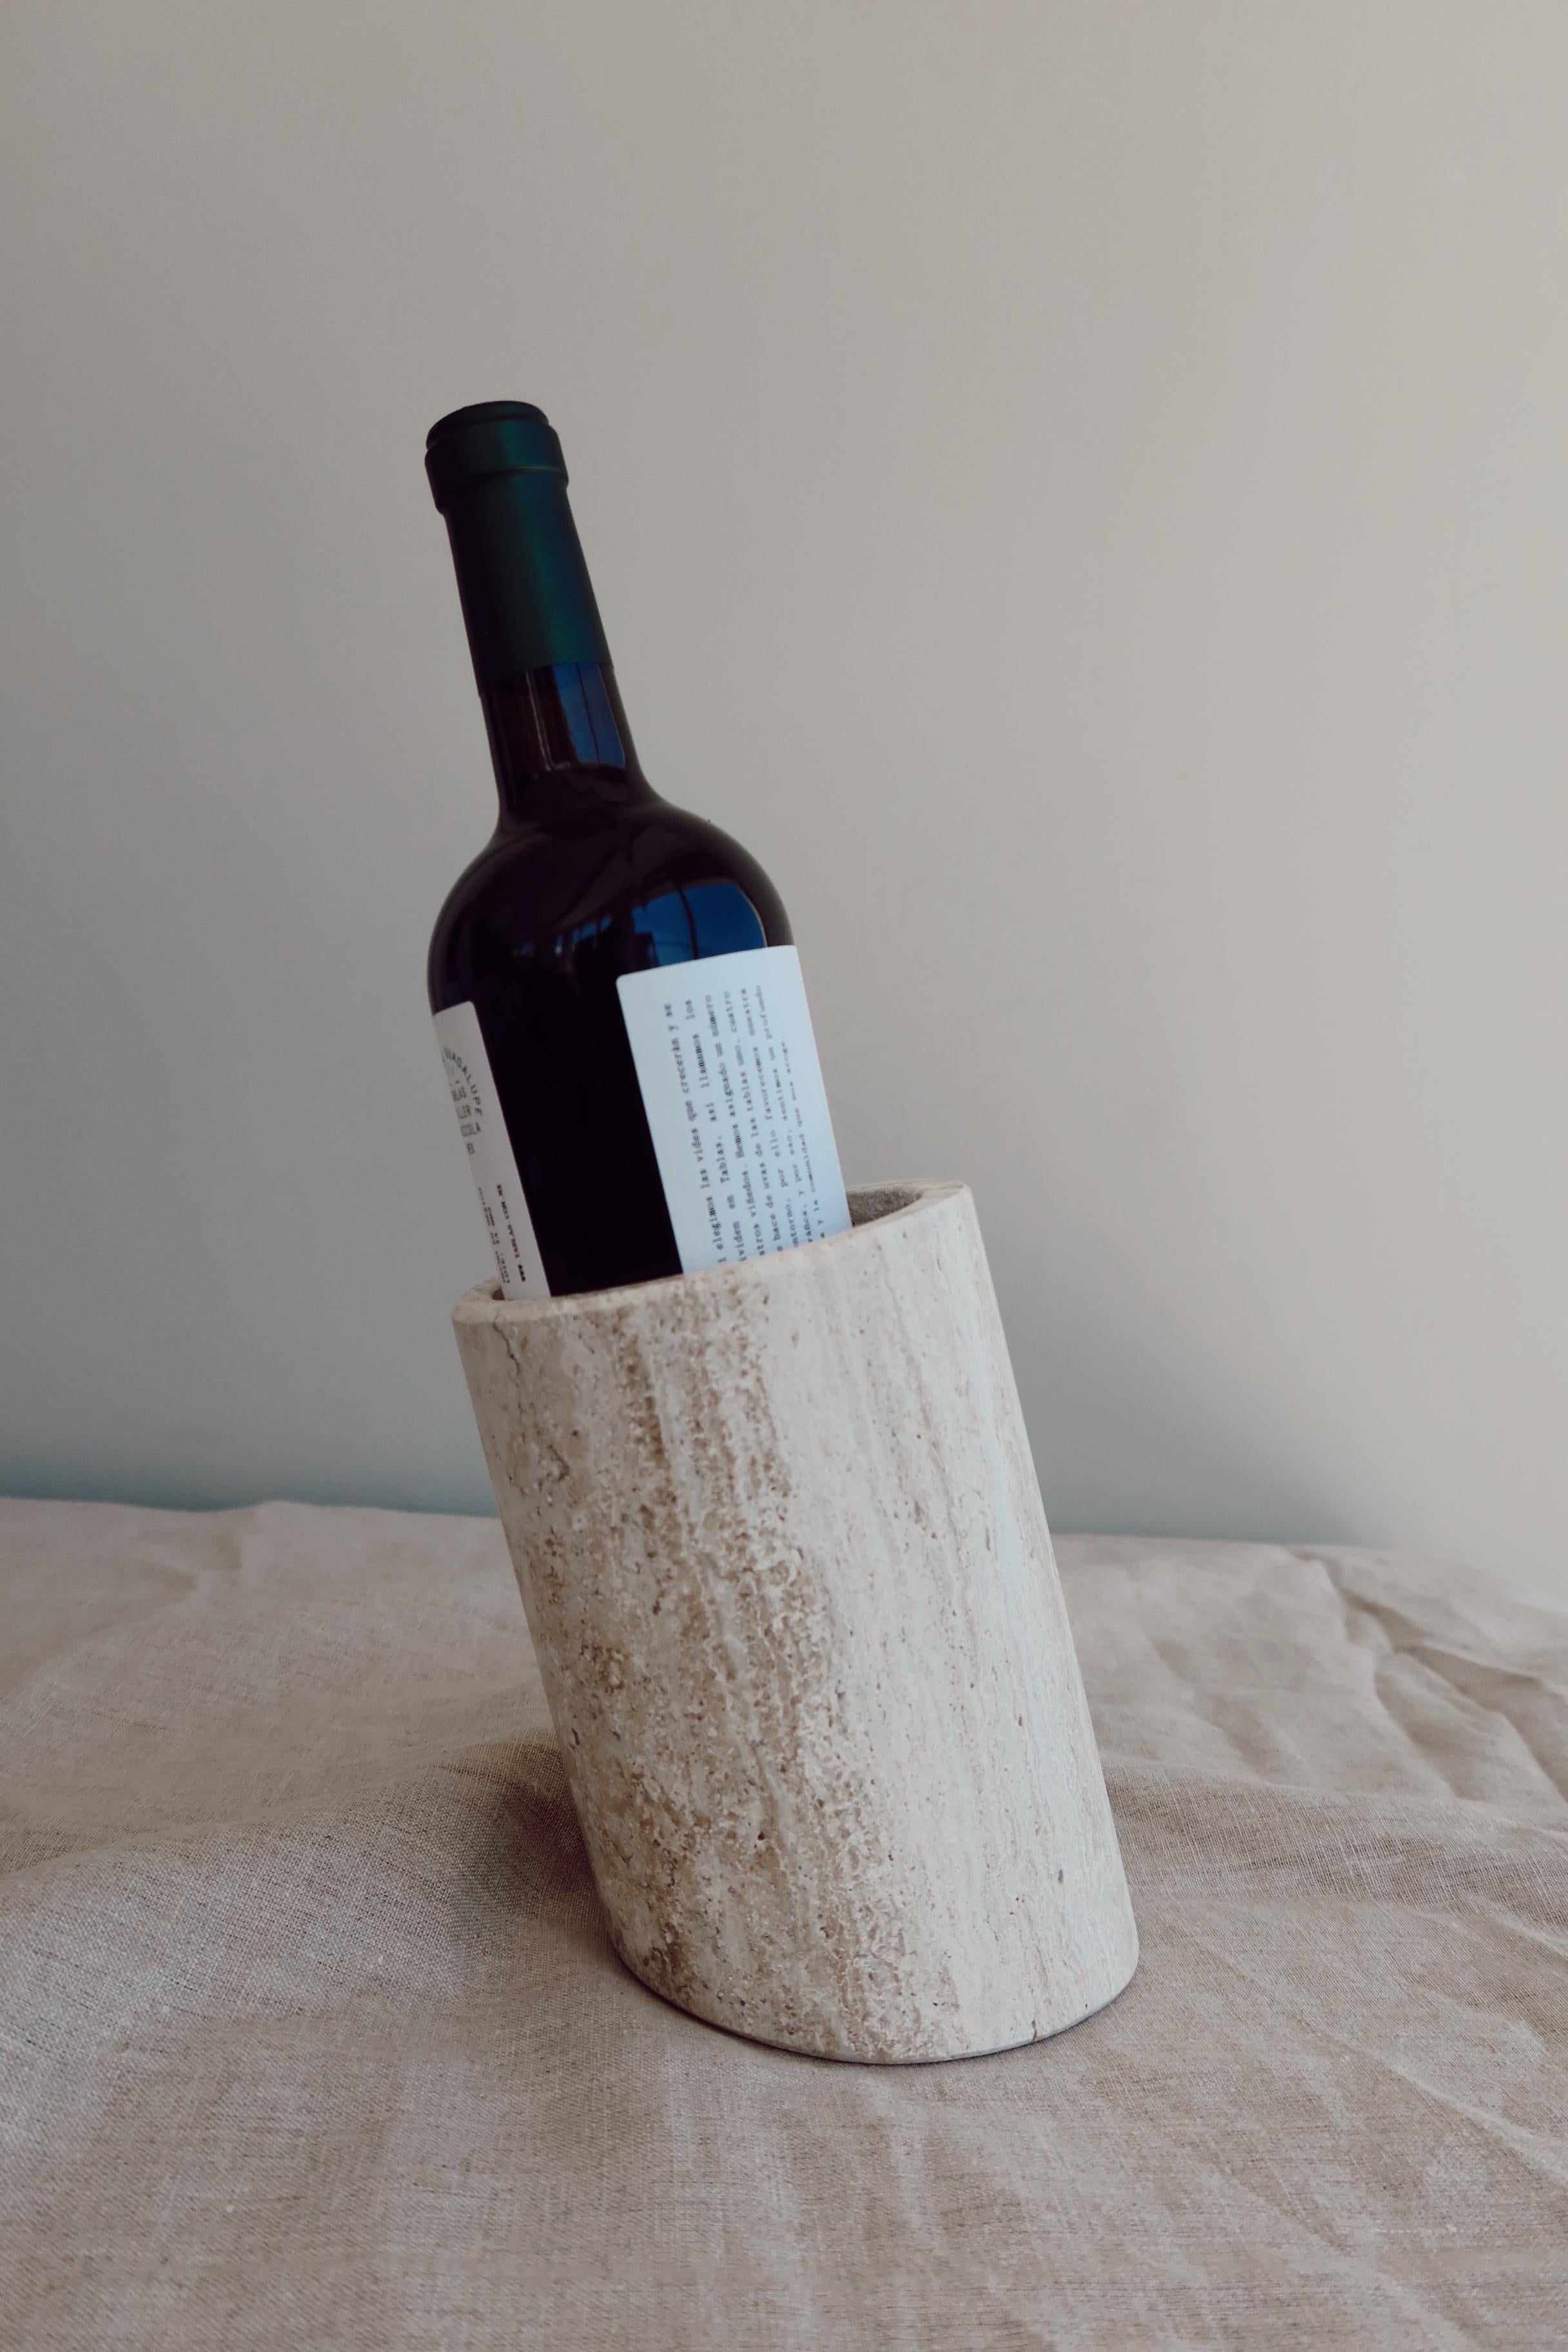 
A Mexican handcrafted marble bottle holder exudes elegance and practicality, elevating any dining experience. Meticulously crafted from exquisite Mexican marbles such as travertine, white Veneciano, black Queretaro, and gray Santo Tomas, this